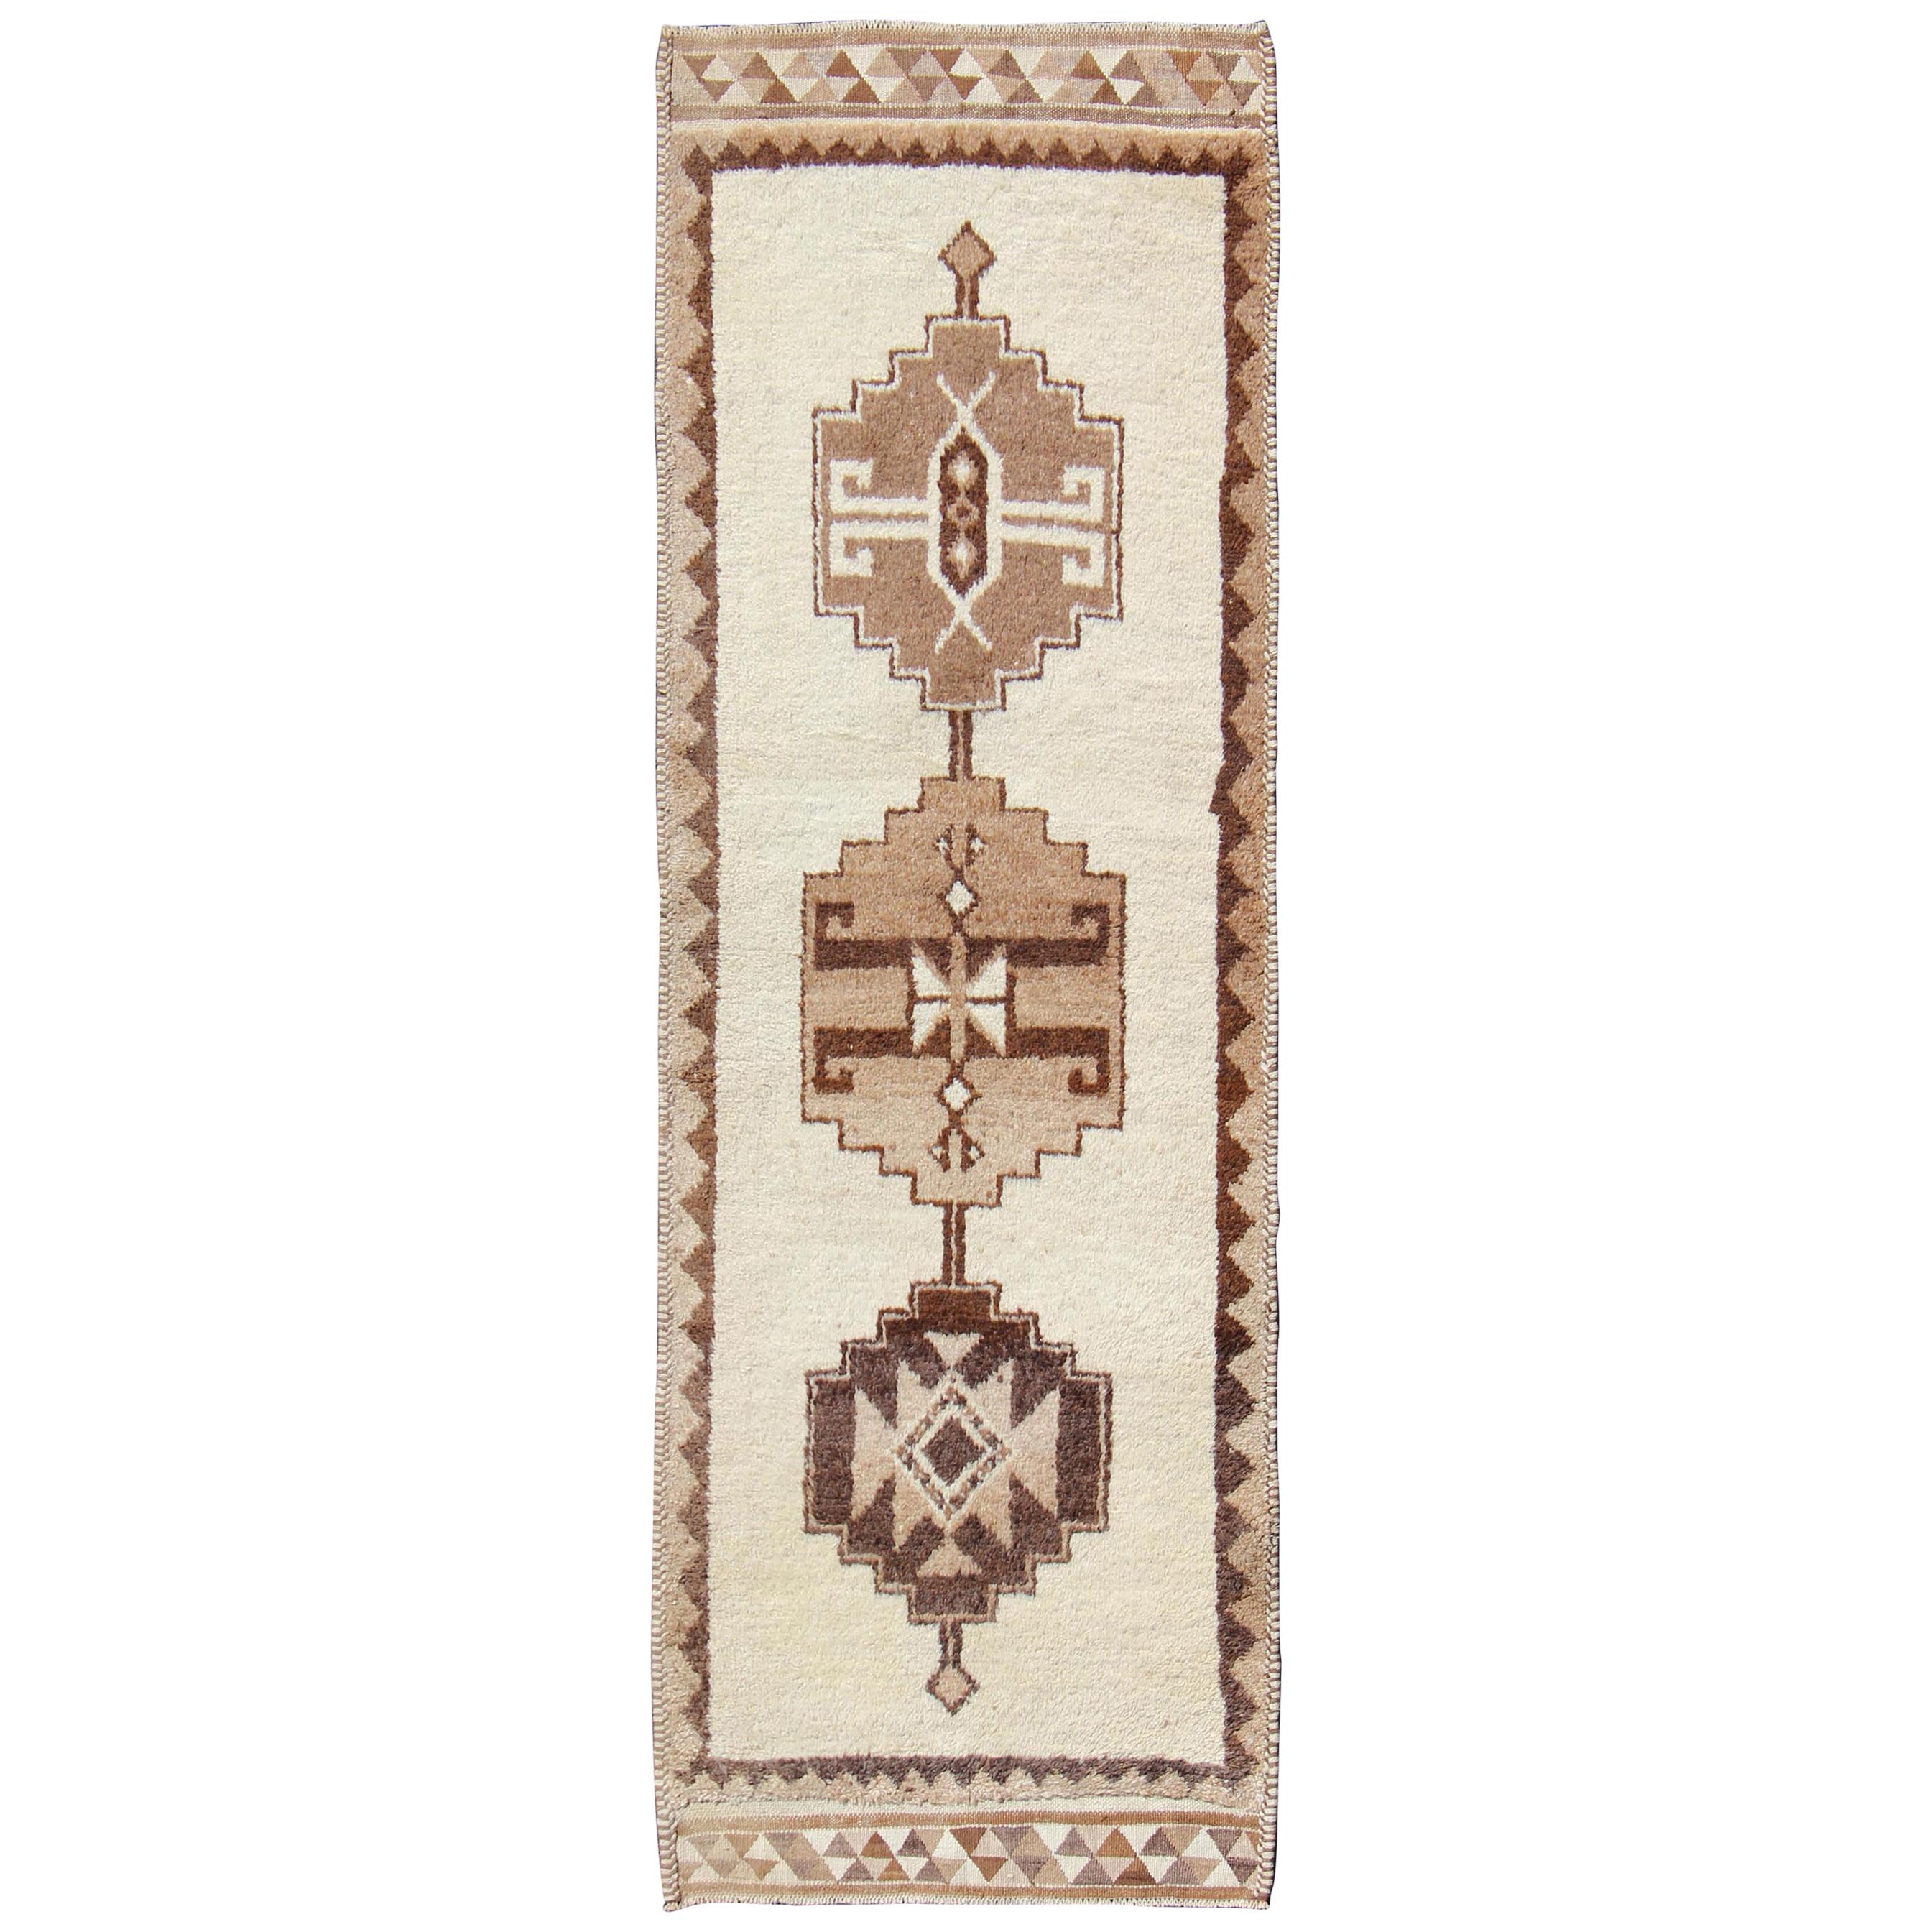 Vintage Turkish Tulu Gallery Rug with Tribal Motifs in Shades of Brown and Cream For Sale